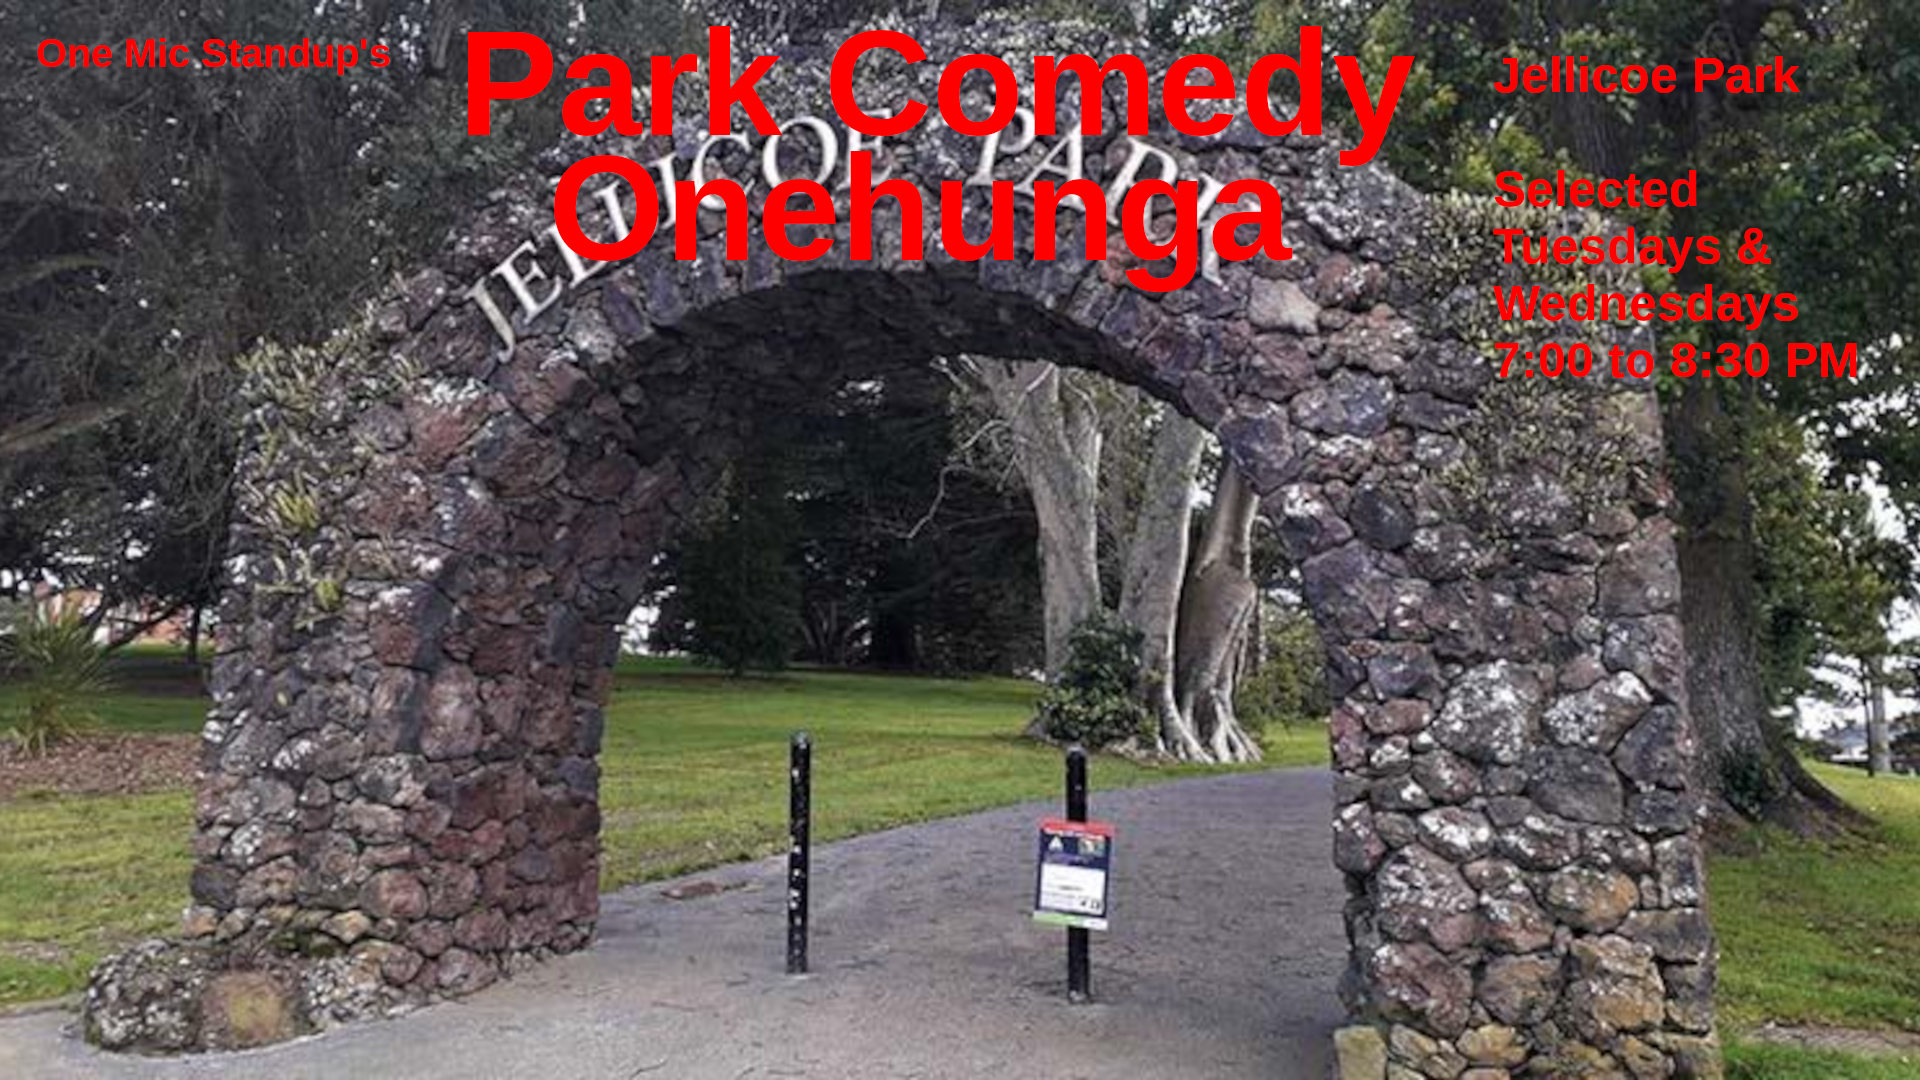 Park Comedy by the memorial arch in Jellicoe Park, Onehunga.